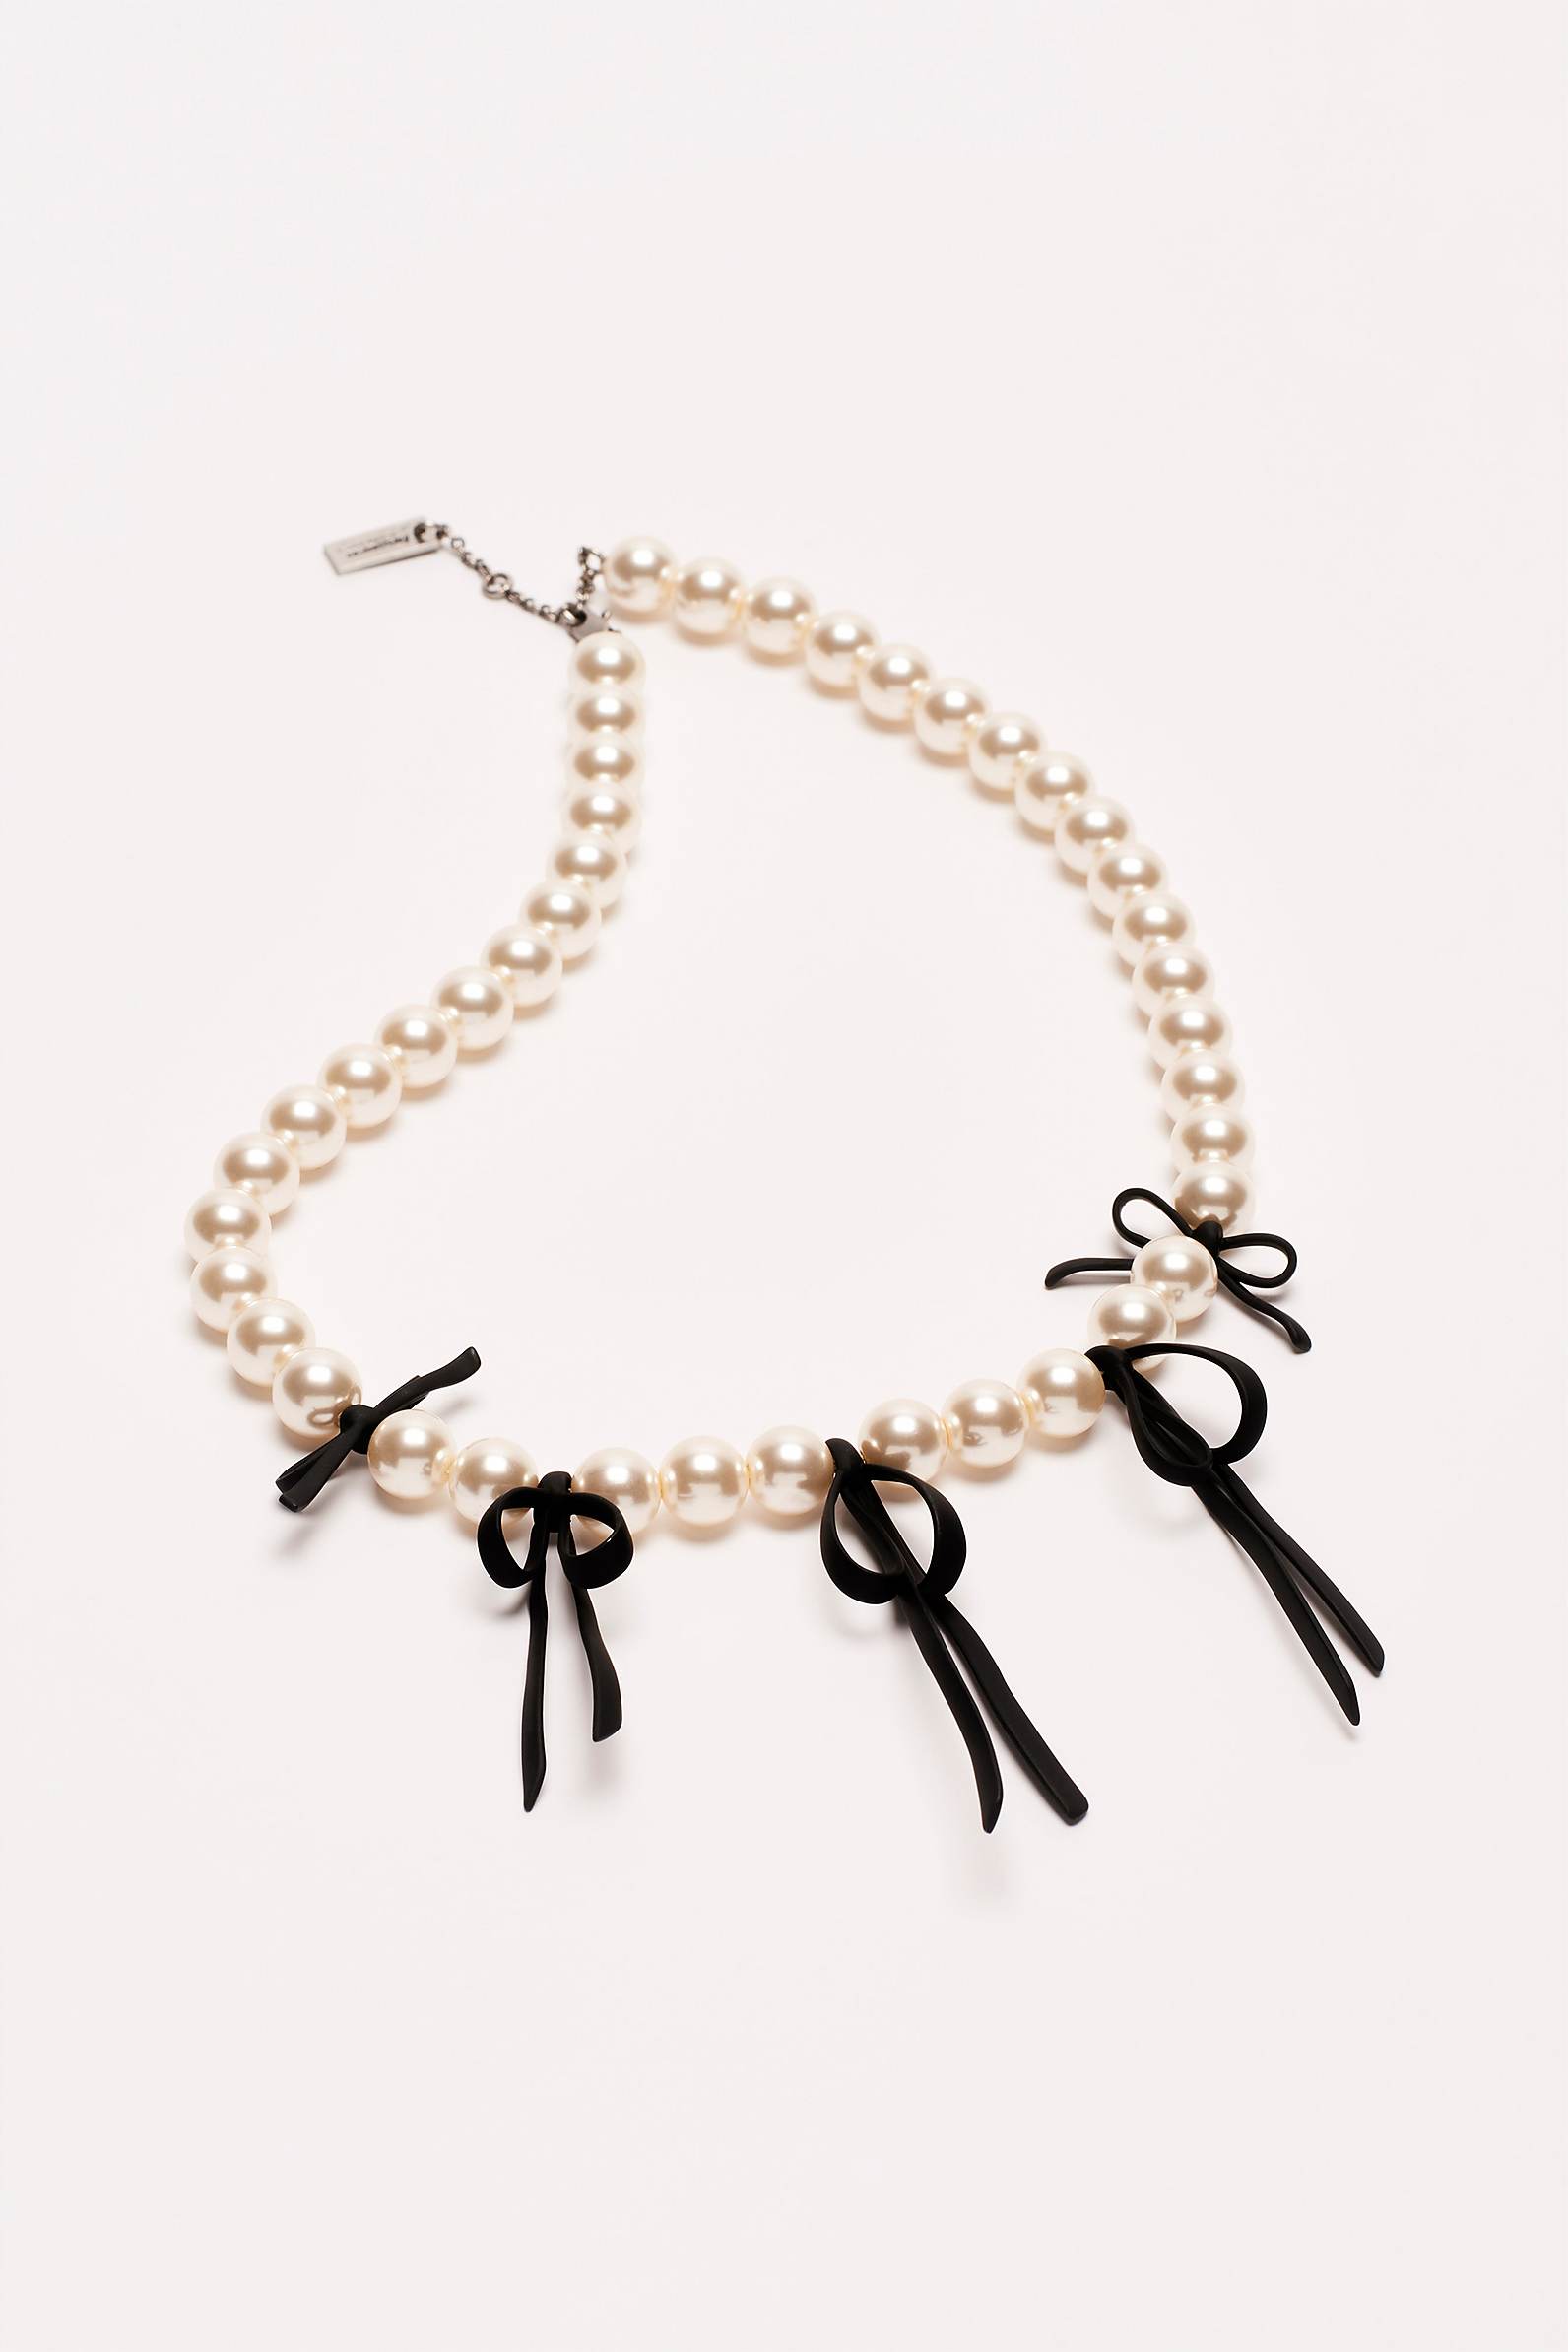 SANDY LIANG X NYC BALLET PEARL NECKLACE